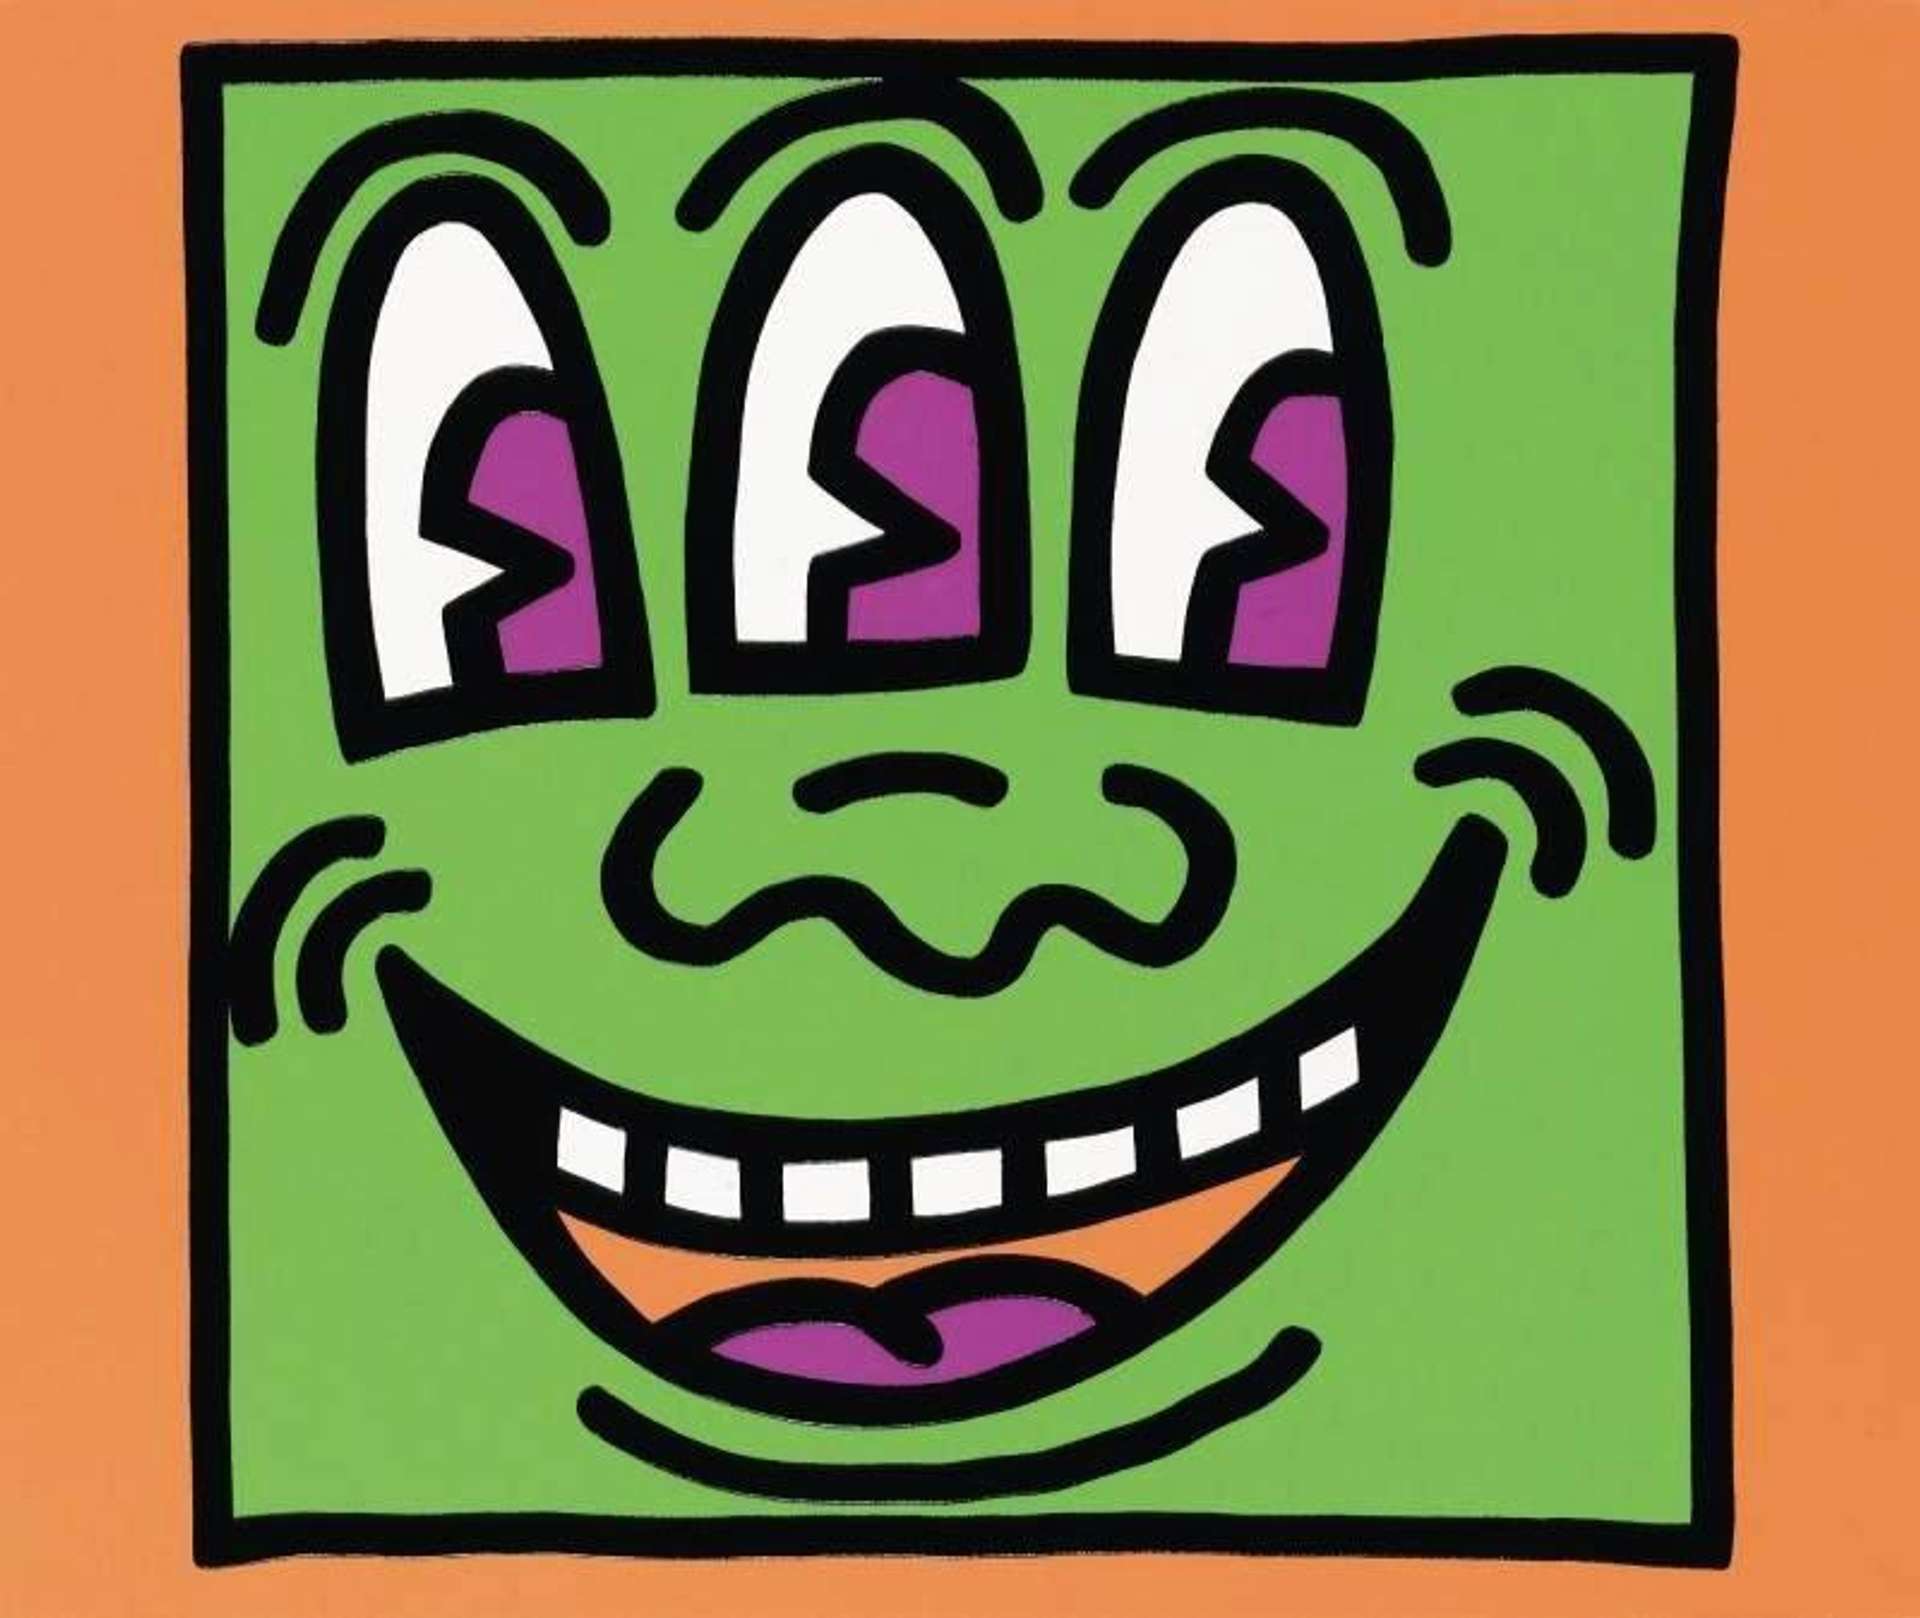 Three Eyed Monster shows an eager and grinning face with three large eyes looking to the side.It is rendered in flat, saturated colours (green, orange and purple) and thick outlines.